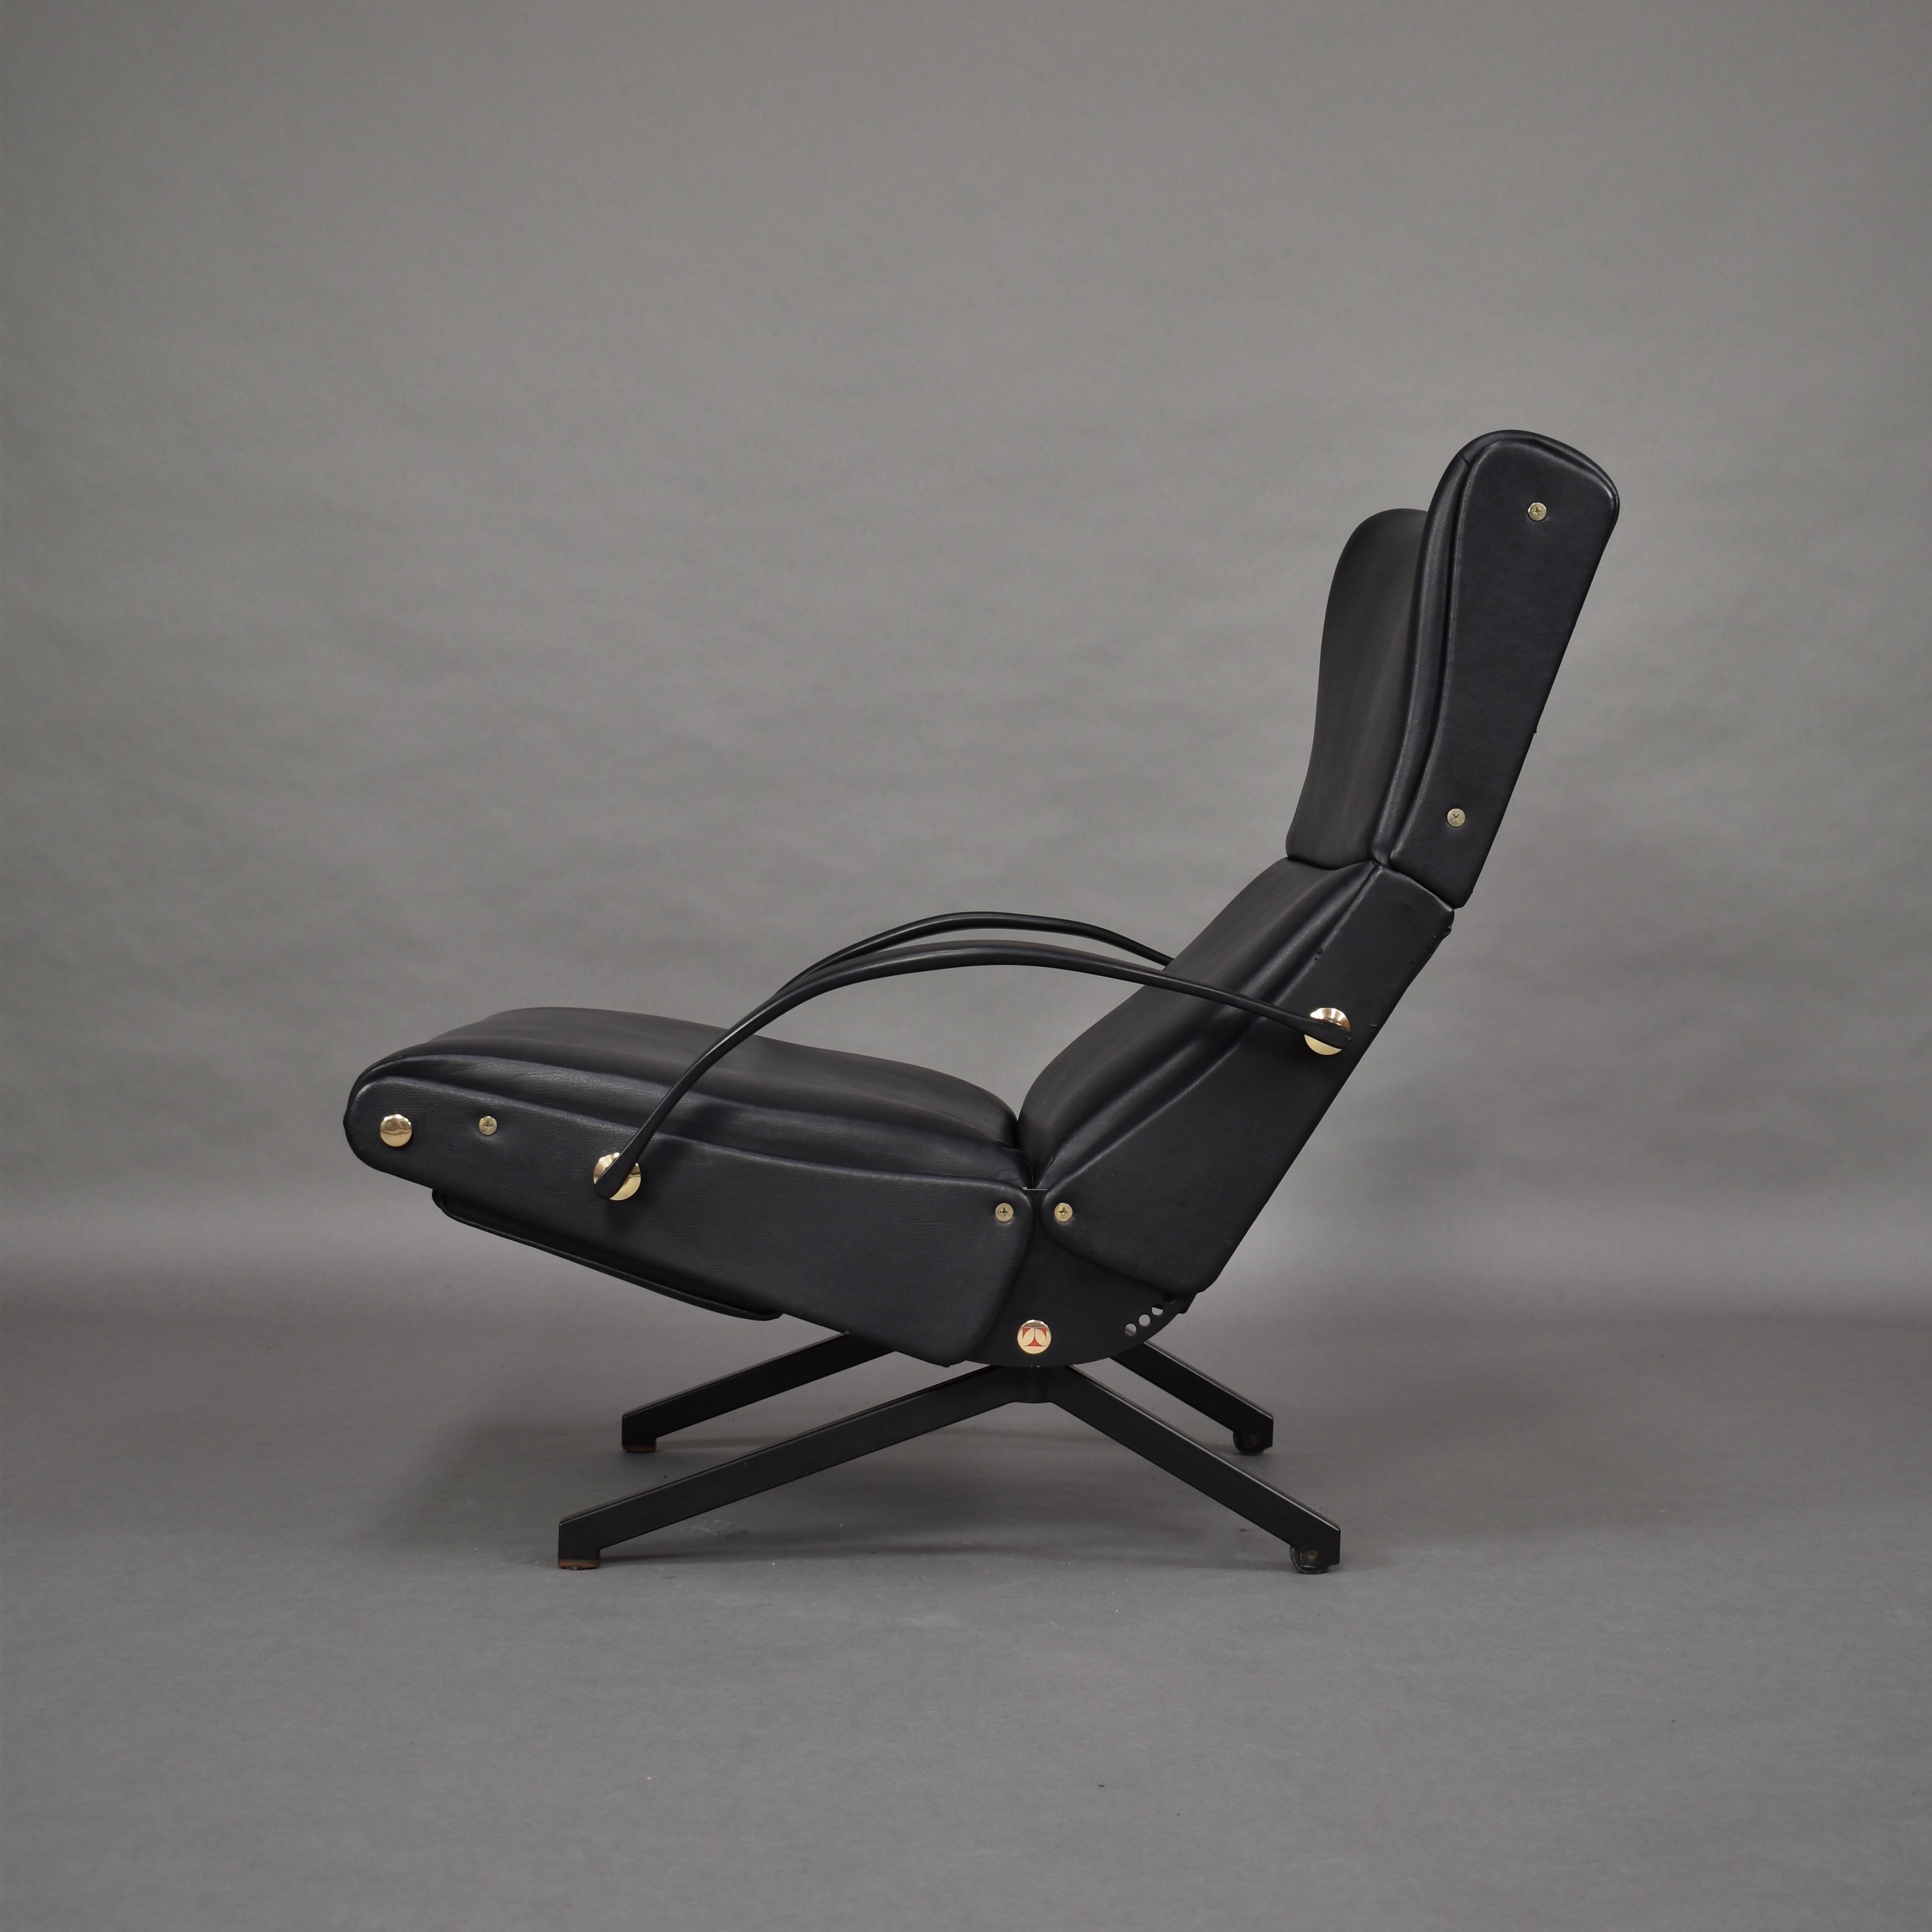 Stunning P40 chair by Osvaldo Borsani for Tecno - Italy, circa 1970.
This chair still has the original black leatherette. It also has the extendable headrest.

The chair is in very good condition and all the mechanics for the different lounge